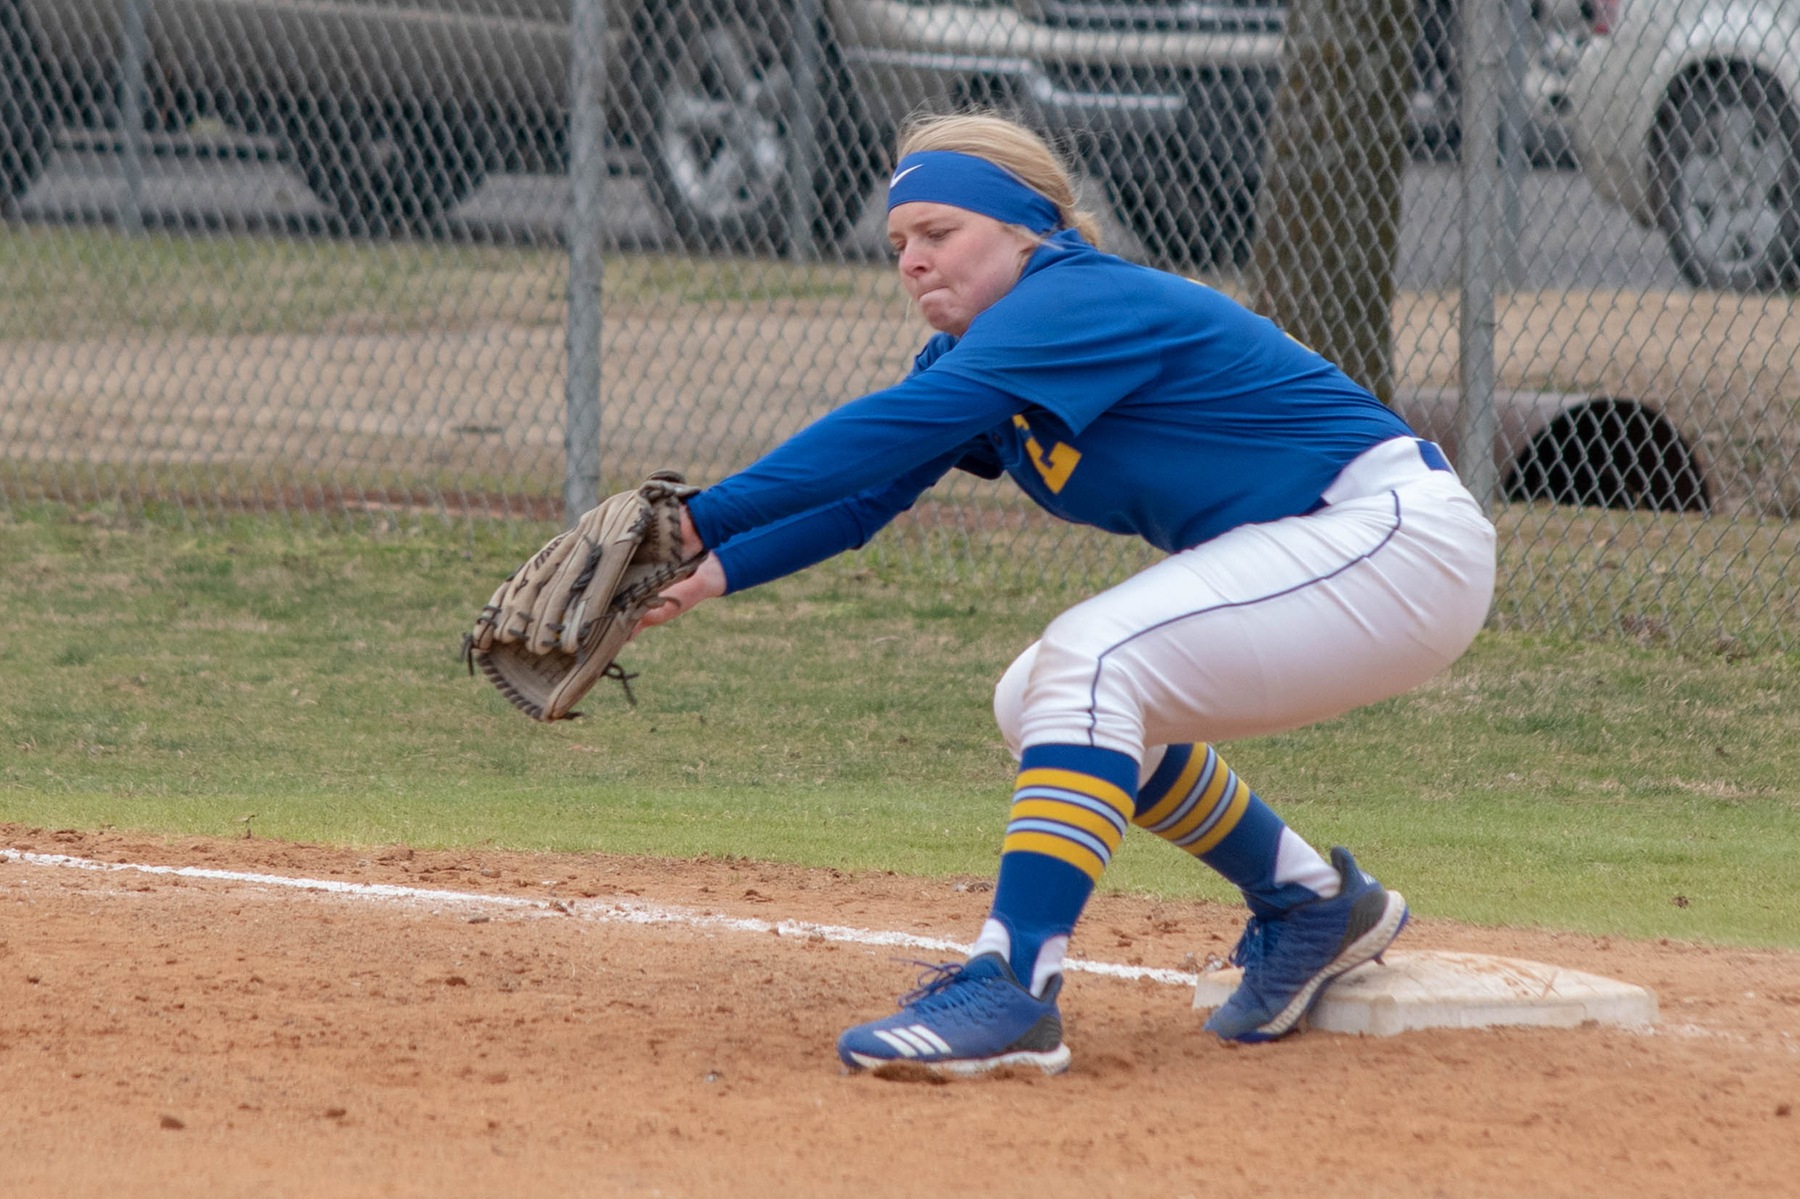 Cailee Hendrick makes a catch for an out at first base in a game earlier this season.